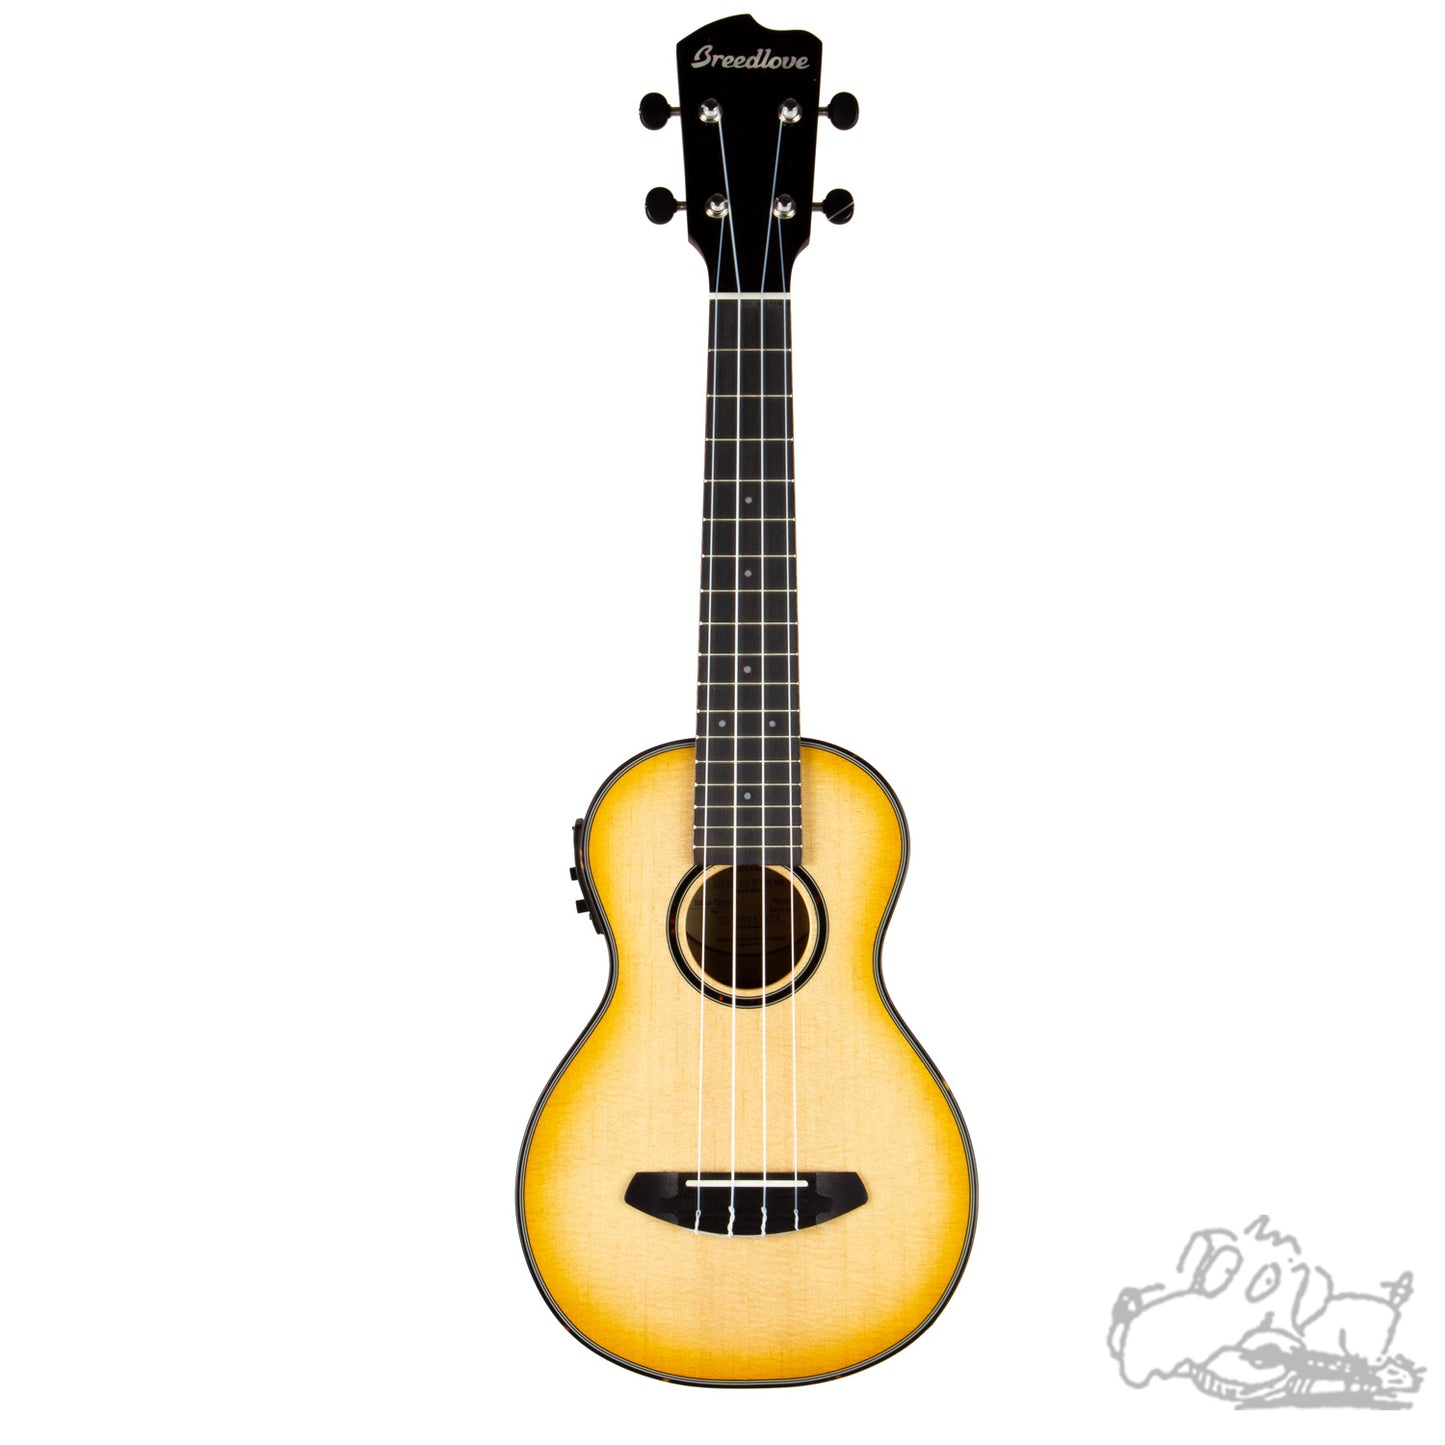 Breedlove Lu’au Concert Natural Shadow E Ukulele with Preamp